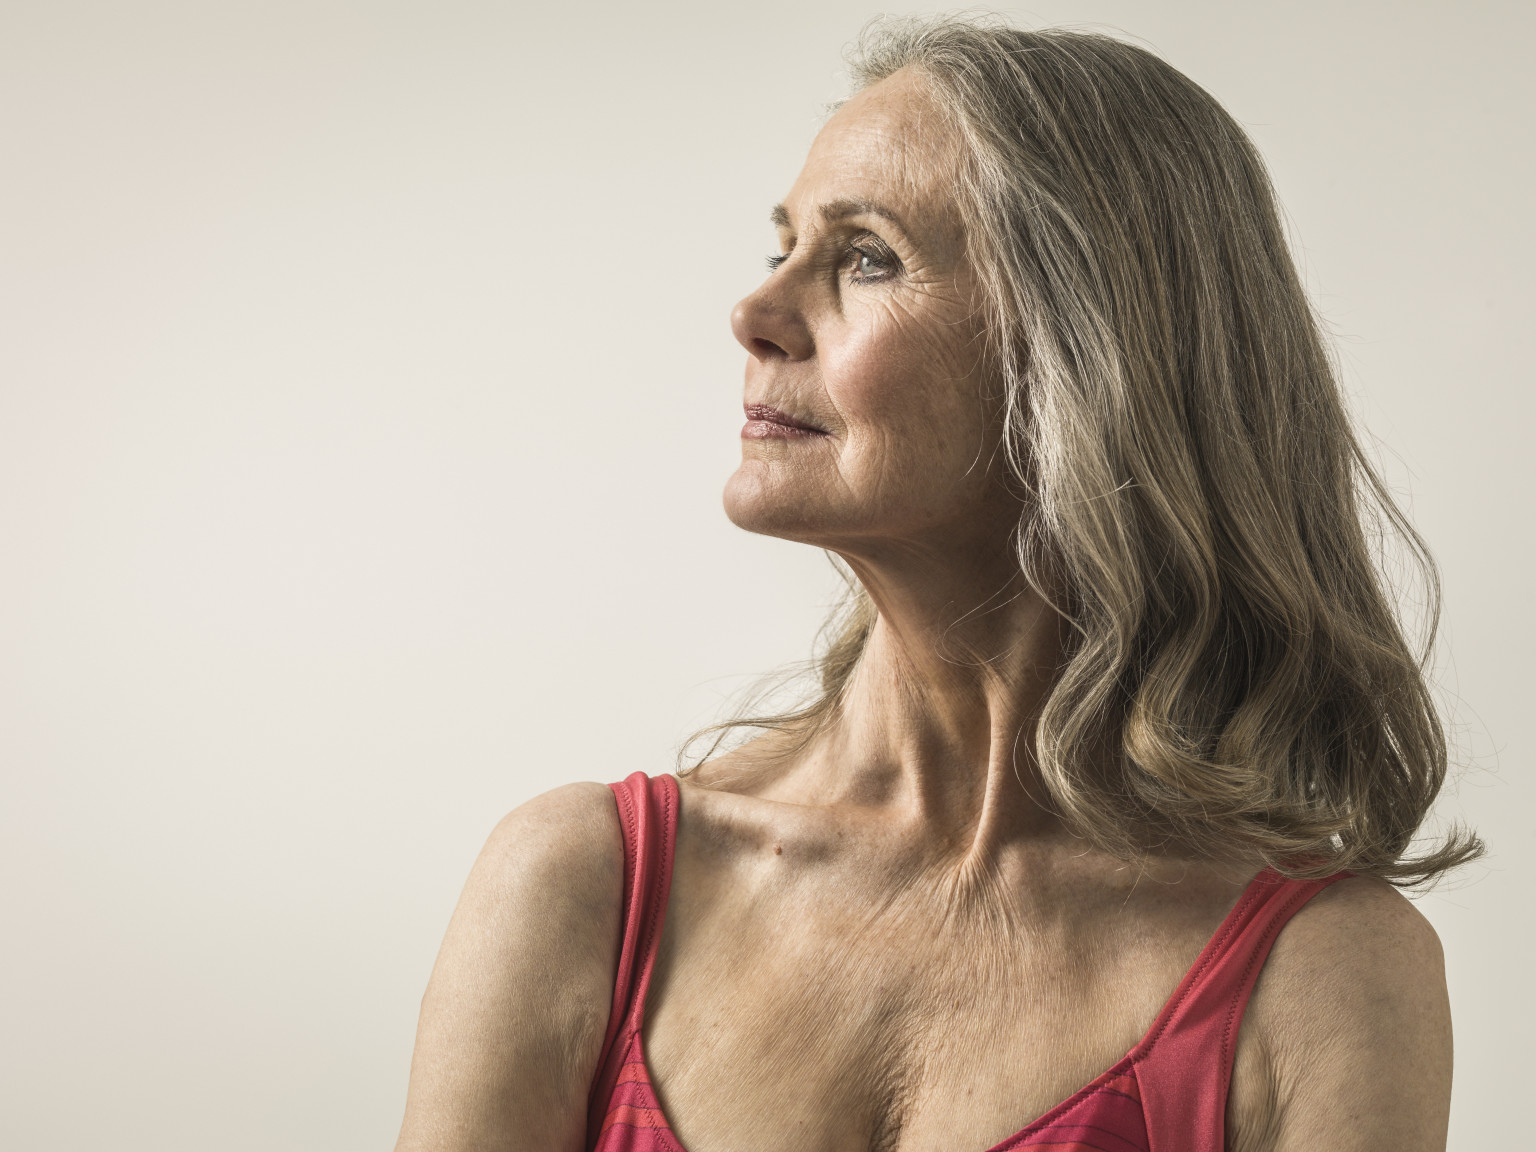 Meet 6 Fabulous Women Aged 73 And Upwards Redefining What It Means To Be Old Huffpost